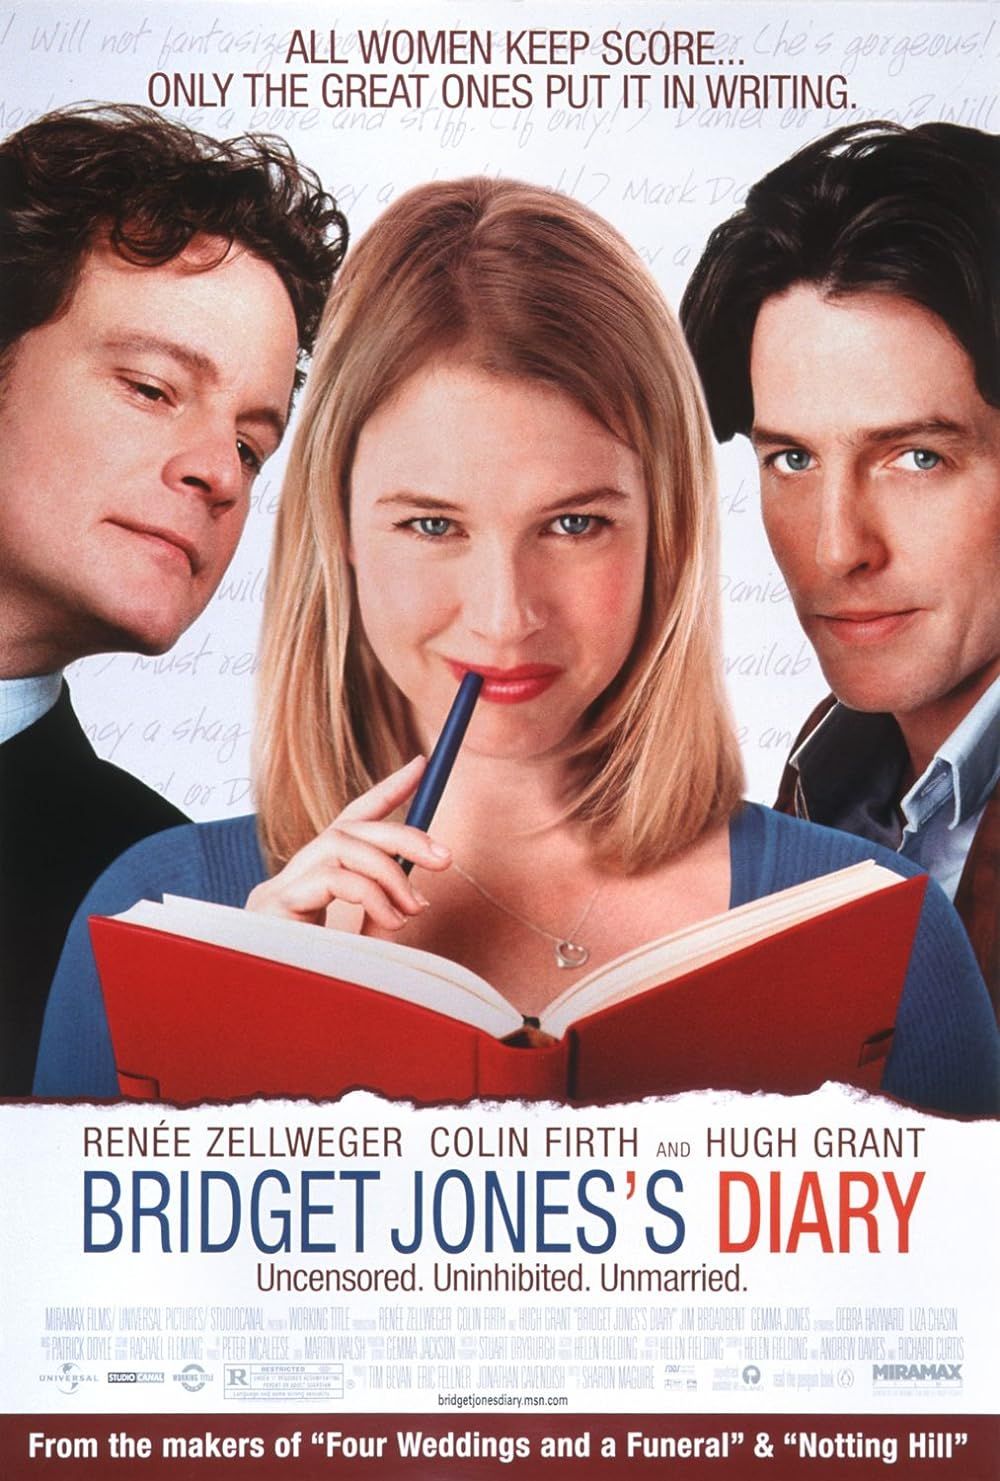 Renee Zellweger, Colin Firth, and Hugh Grant pose mischievously on the Bridget Jones's Diary Poster.